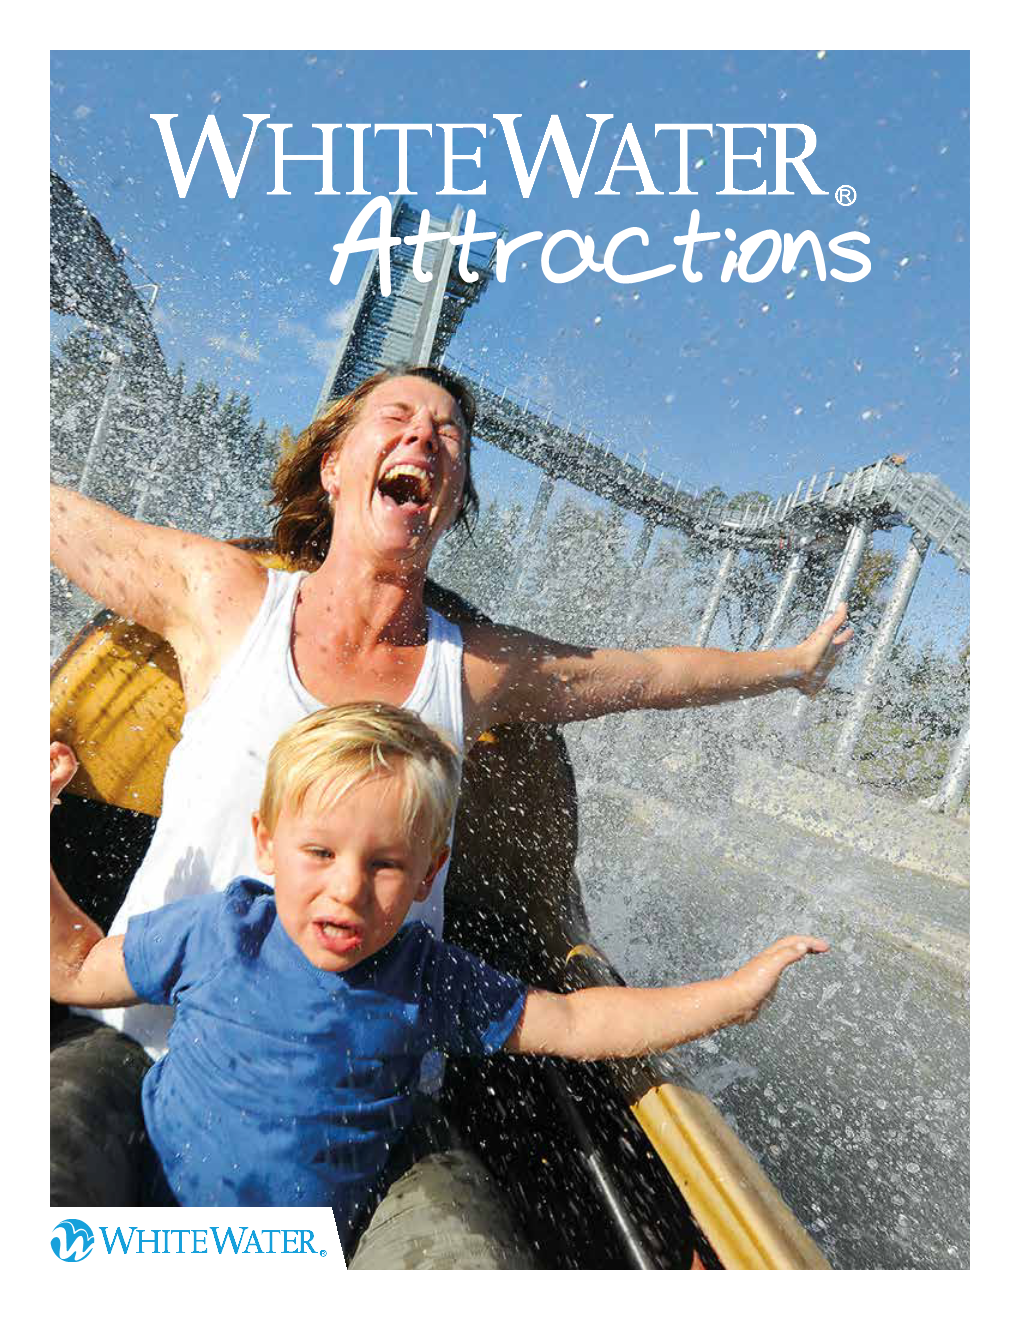 Whitewater-Attractions-Brochure.Pdf